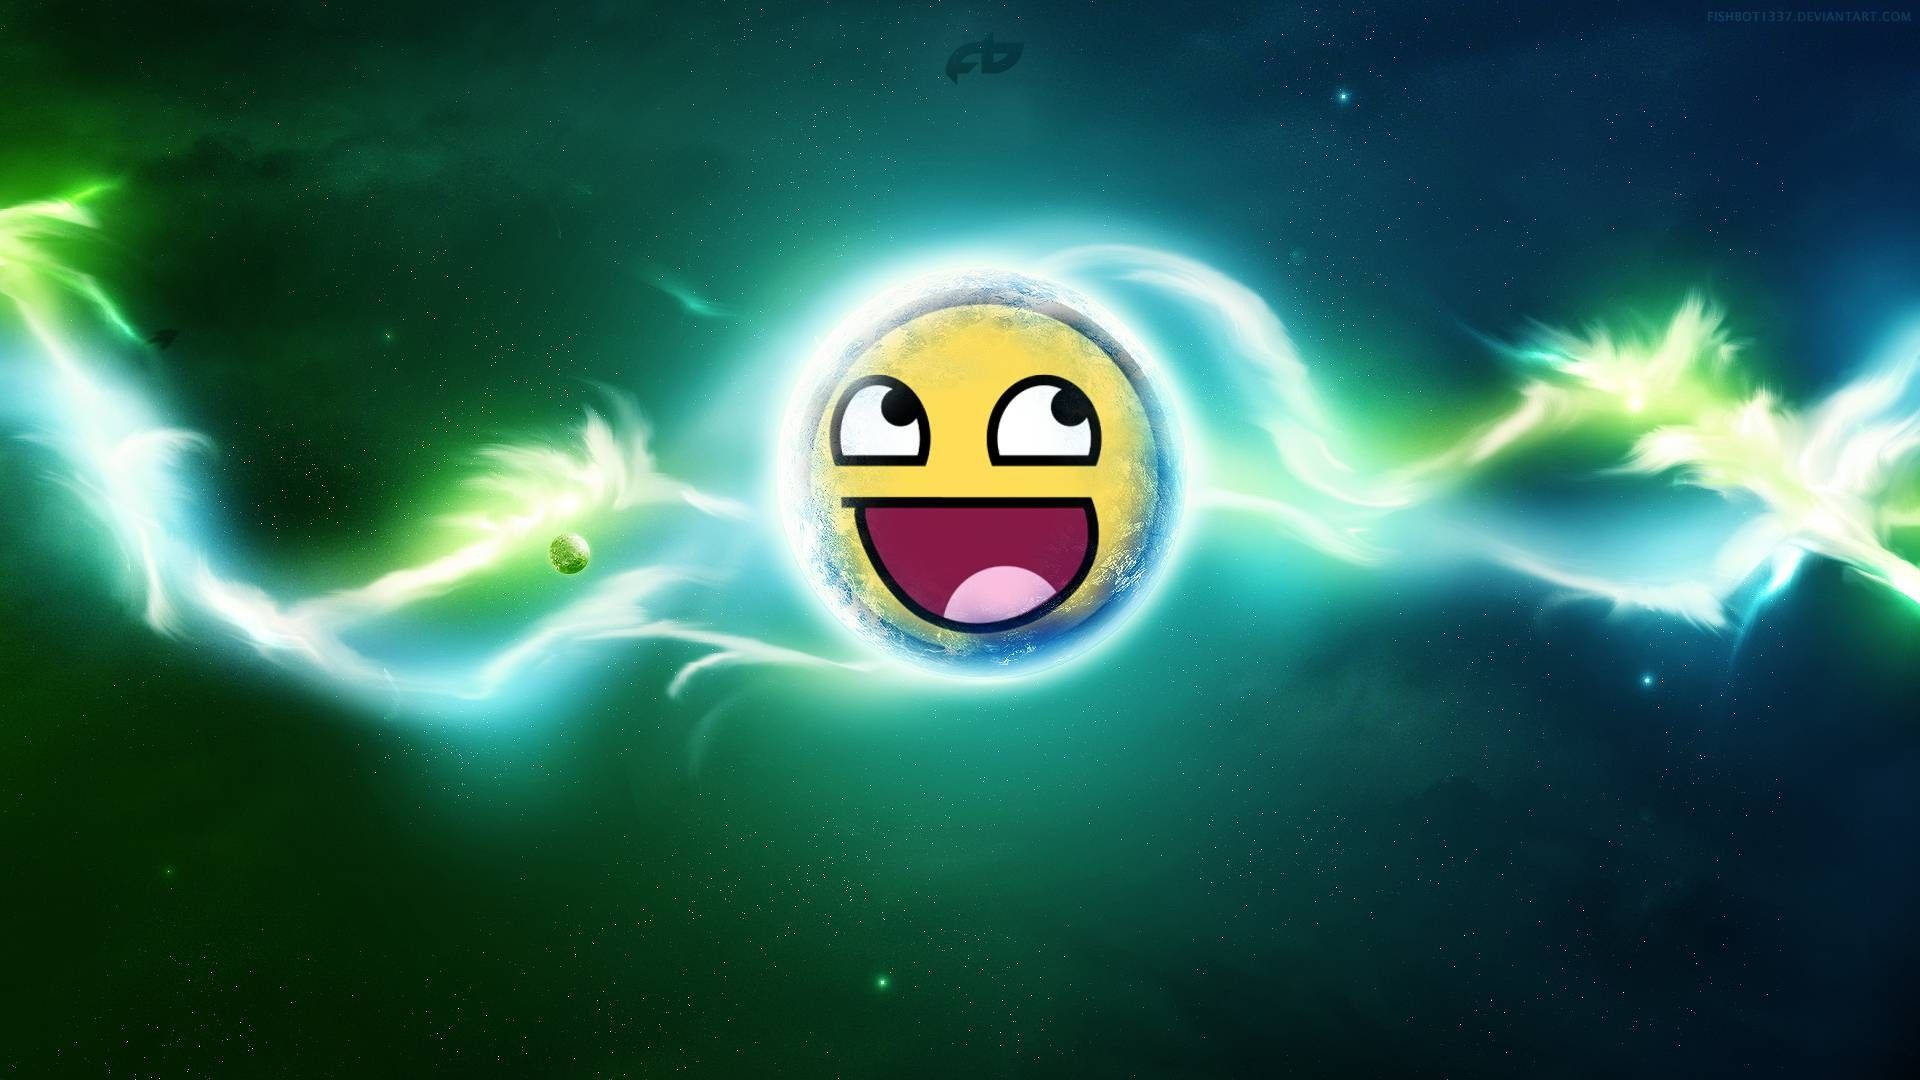 Smiley Face With Lightning Background